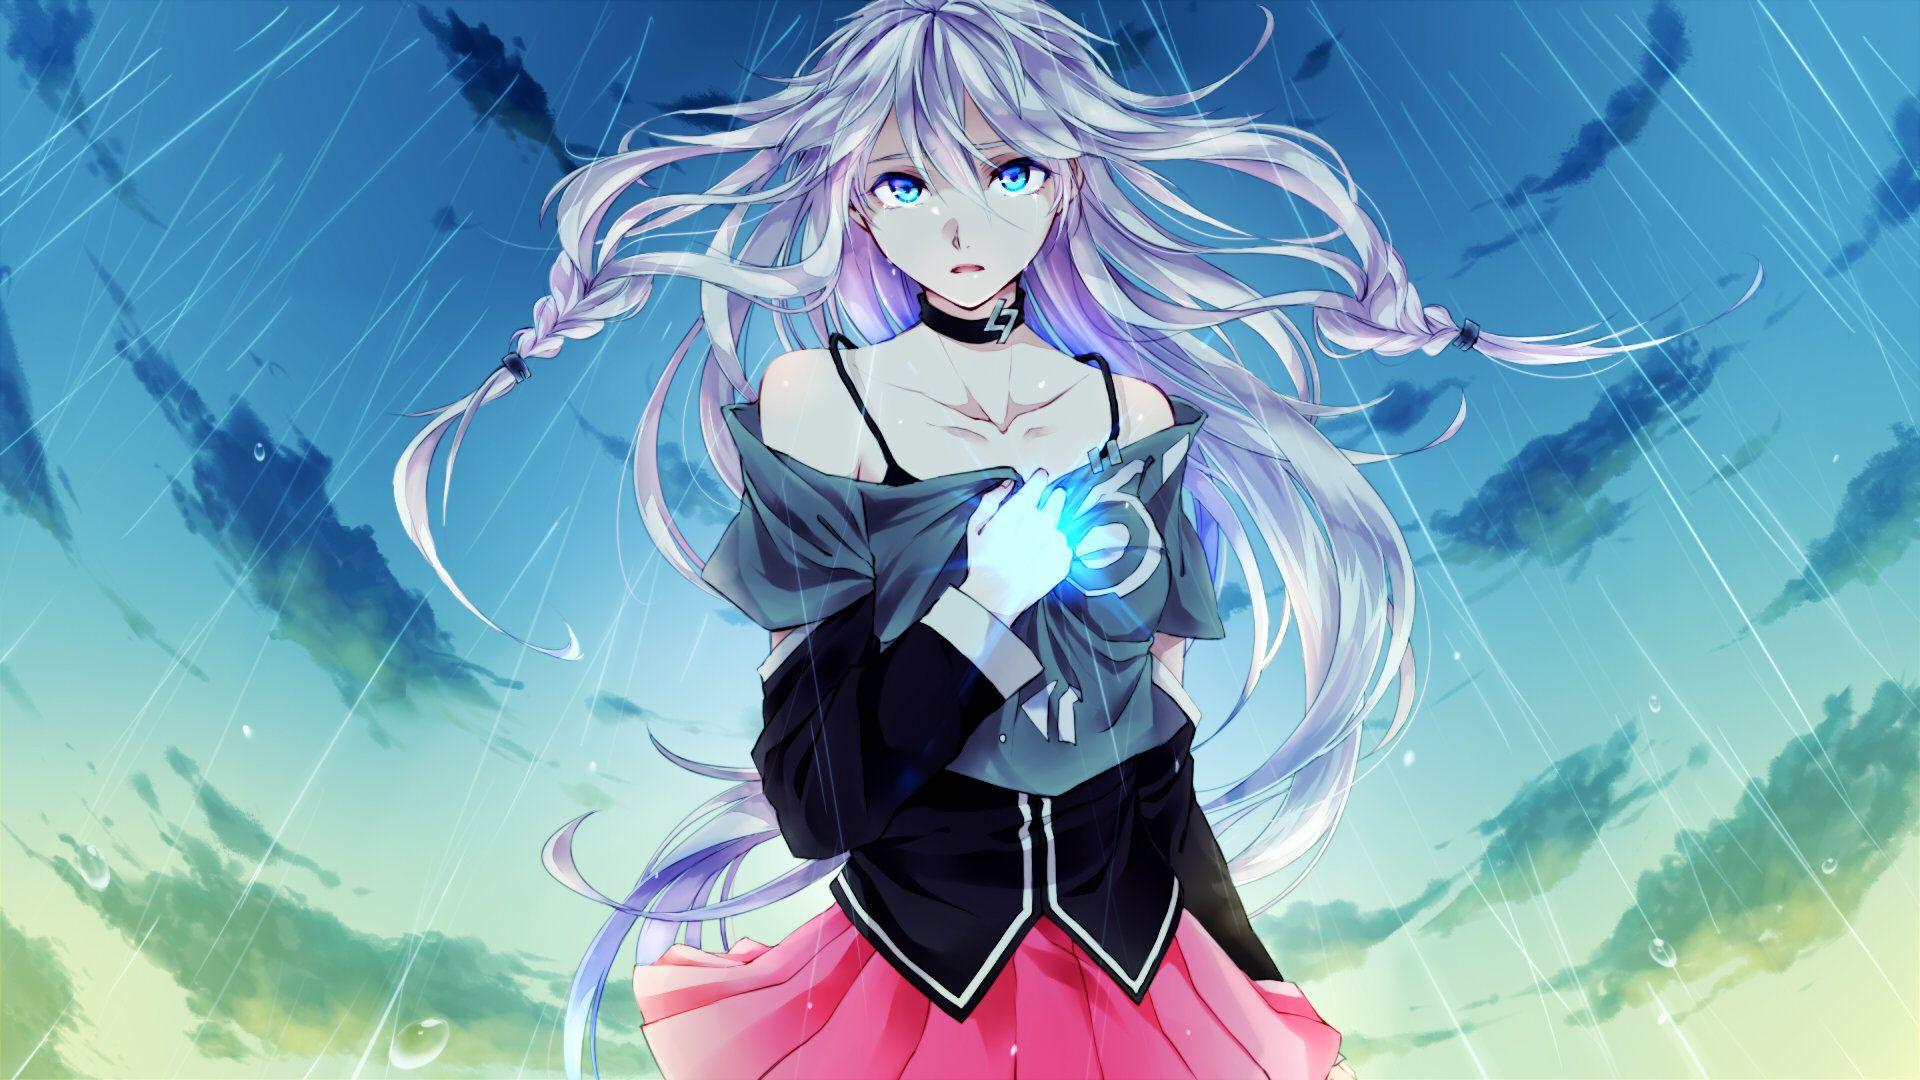 Mobile wallpaper Anime Vocaloid Ia Vocaloid 567068 download the  picture for free